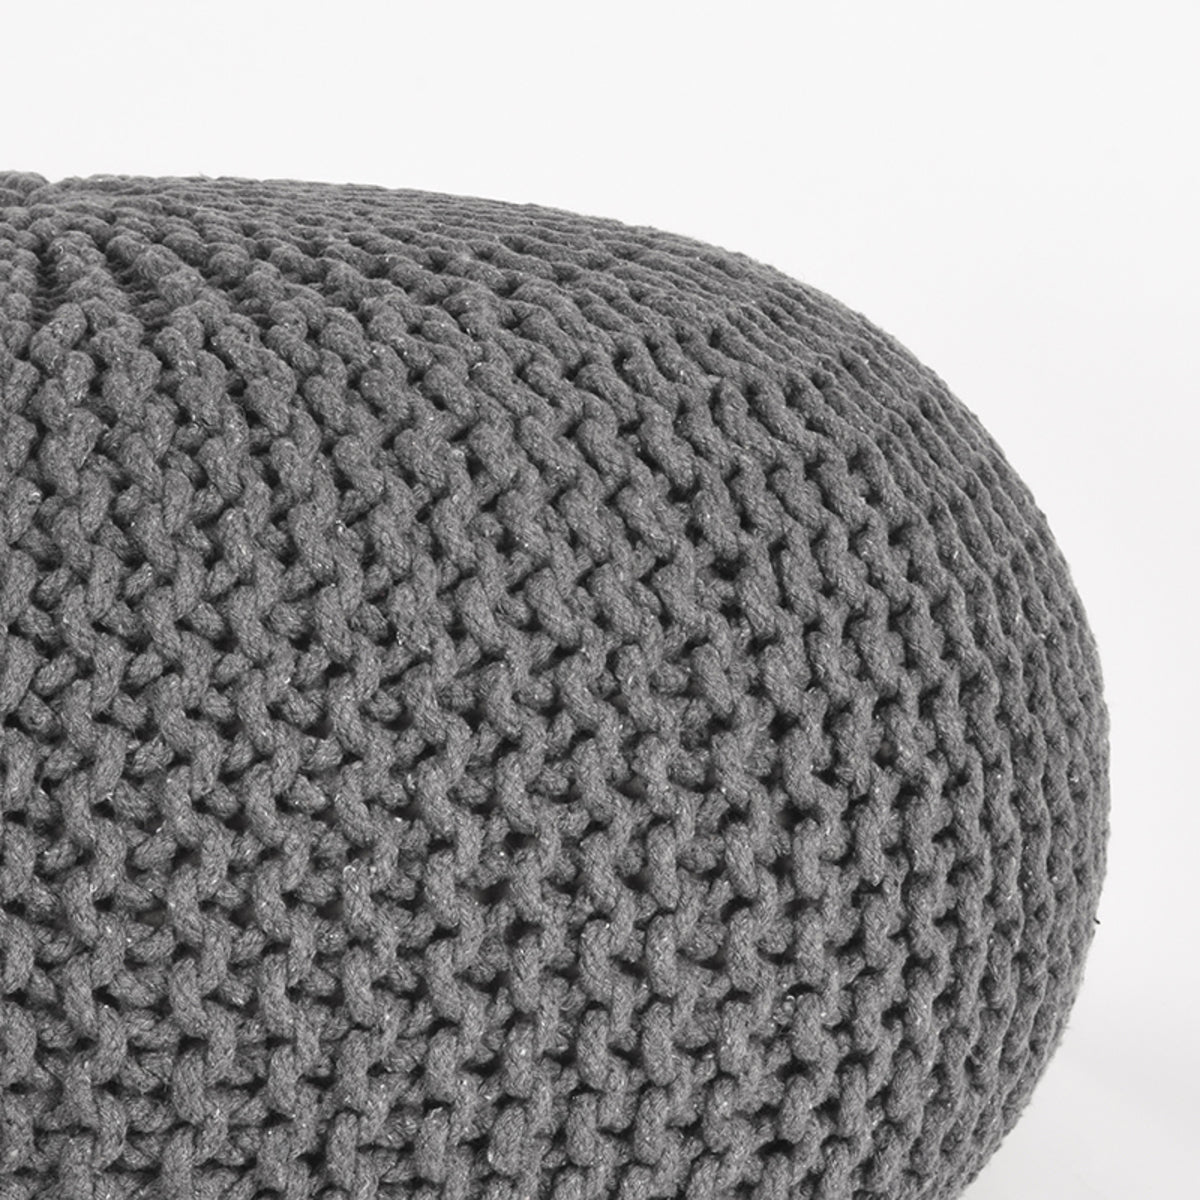 LABEL51 Pouf Knitted - Dark Gray - Cotton - L